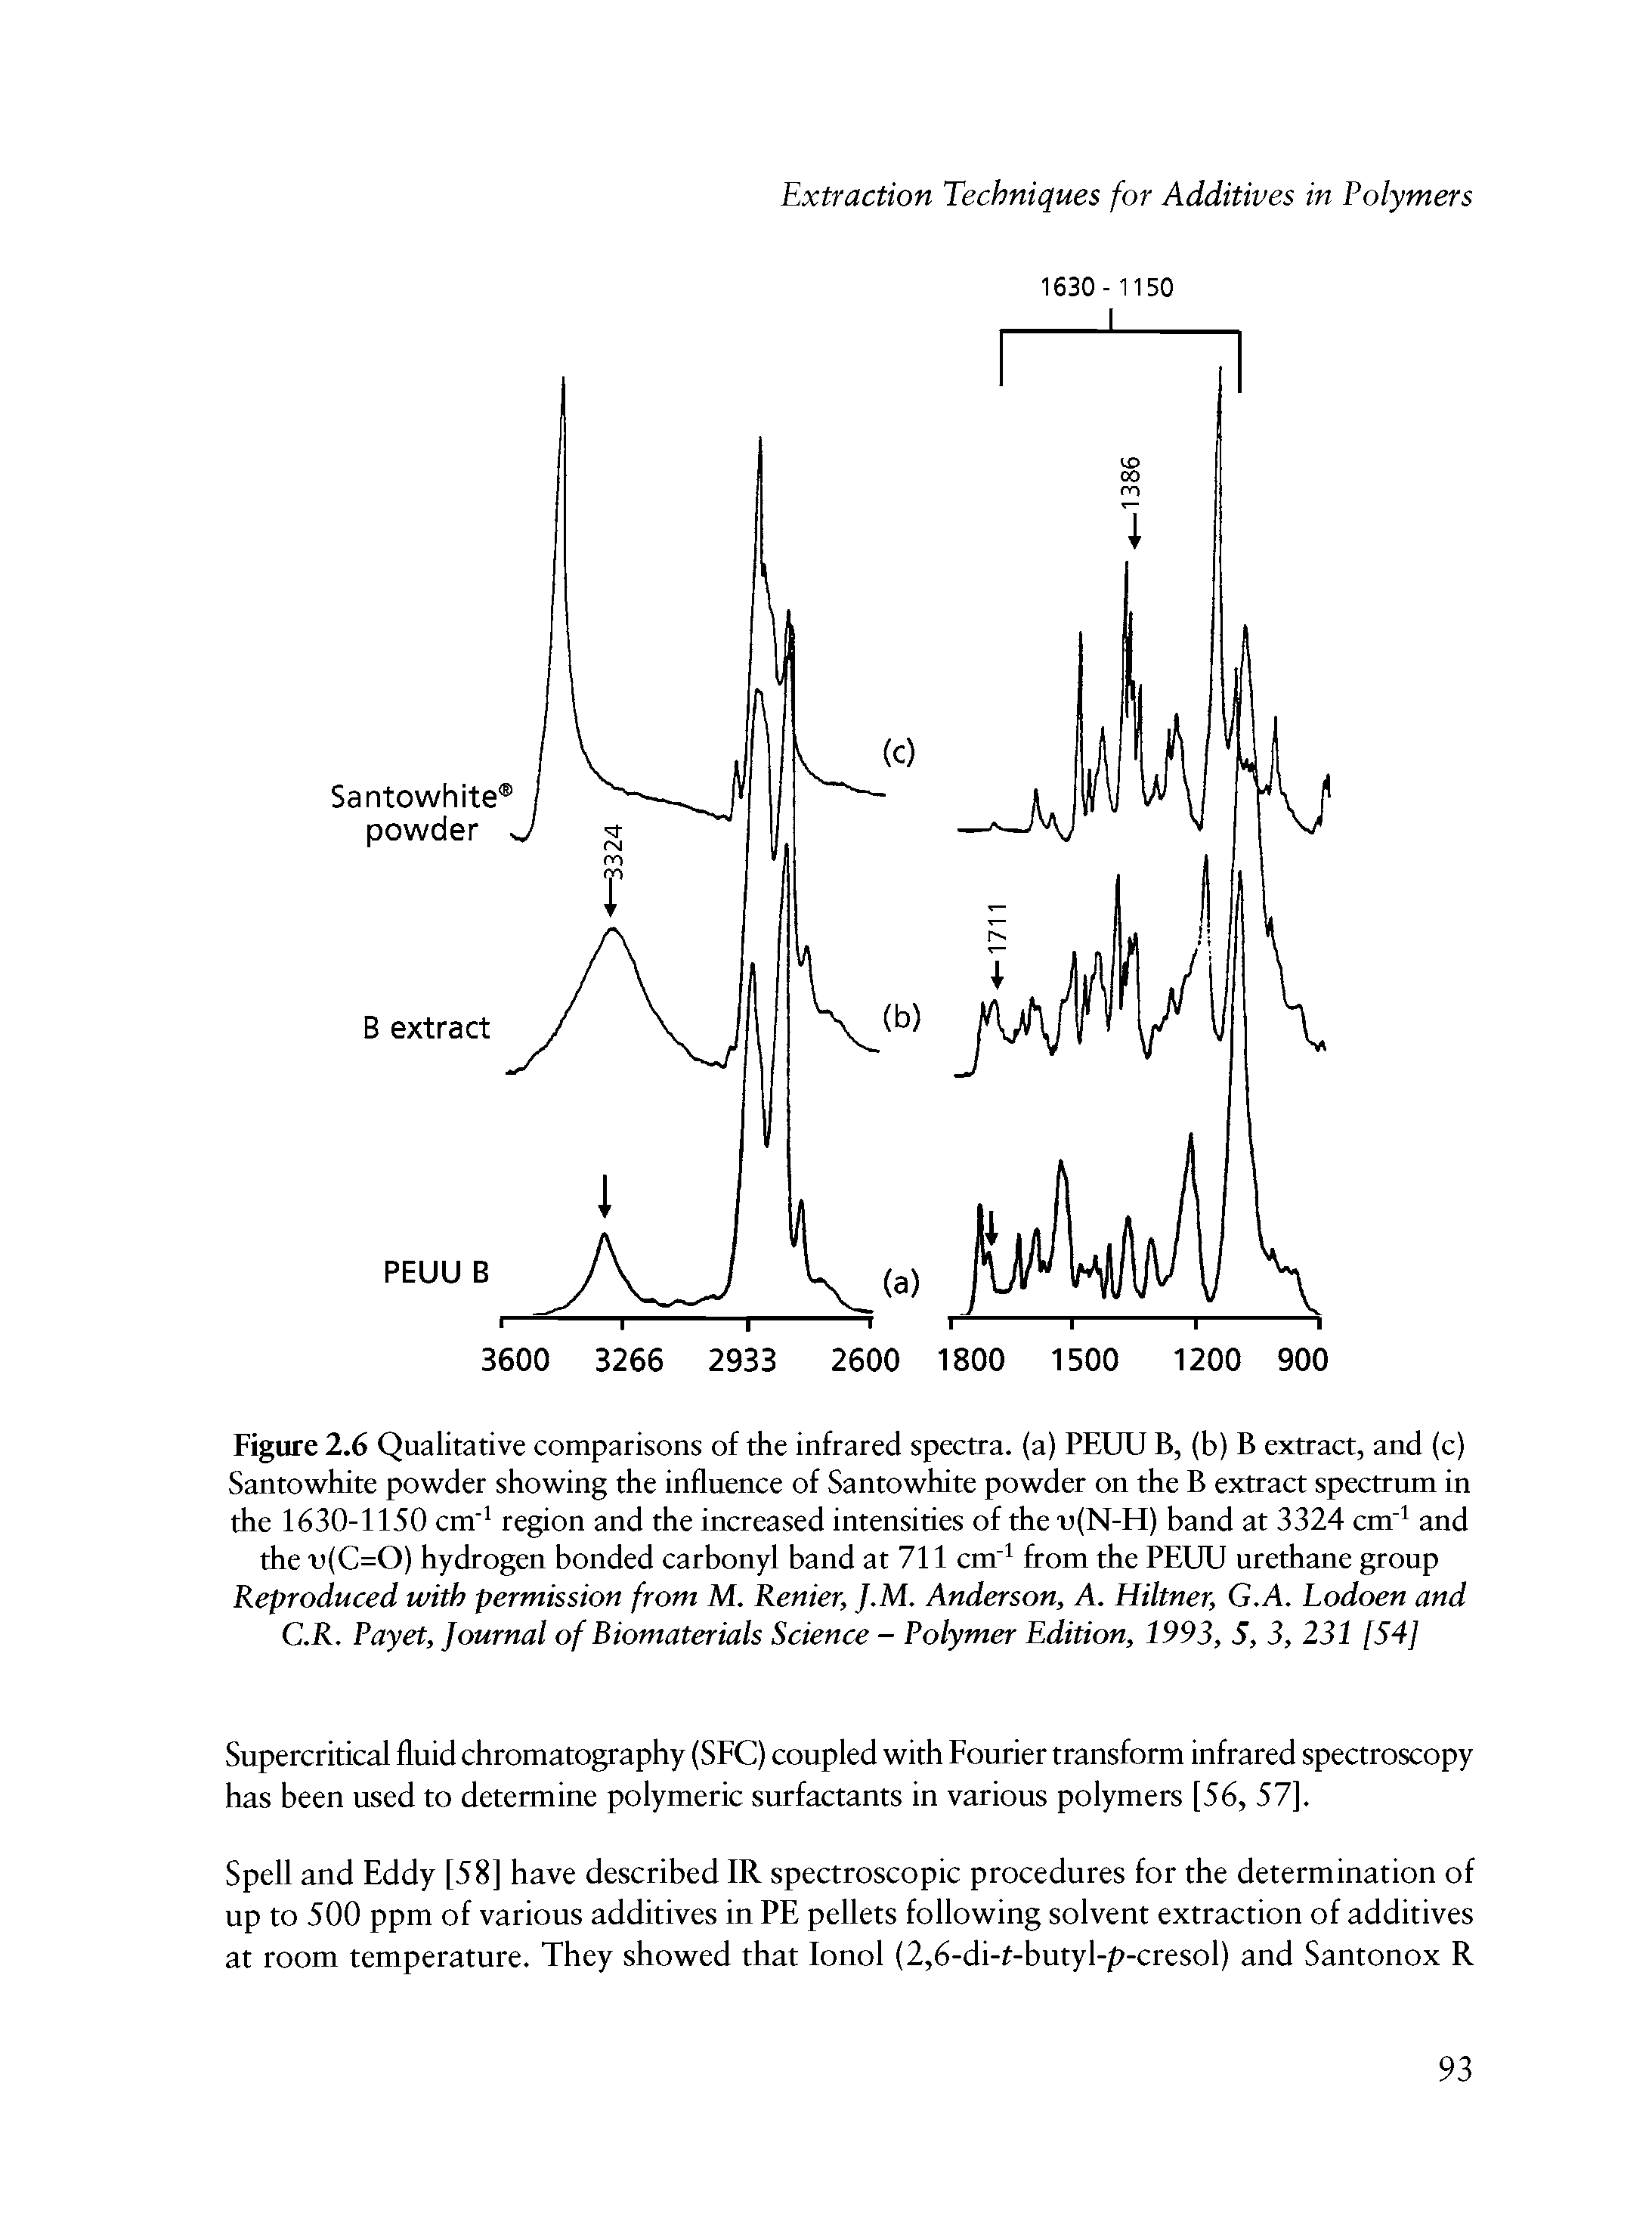 Figure 2.6 Qualitative comparisons of the infrared spectra, (a) PEUU B, (b) B extract, and (c) Santowhite powder showing the influence of Santowhite powder on the B extract spectrum in the 1630-1150 cm region and the increased intensities of the olN-H) band at 3324 cm and the u(C=0) hydrogen bonded carbonyl band at 711 cm from the PEUU urethane group Reproduced with permission from M. Renier, J.M. Anderson, A. Hiltner, G.A. Lodoen and C.R. Payet, Journal of Biomaterials Science - Polymer Edition, 1993, 5, 3, 231 [54]...